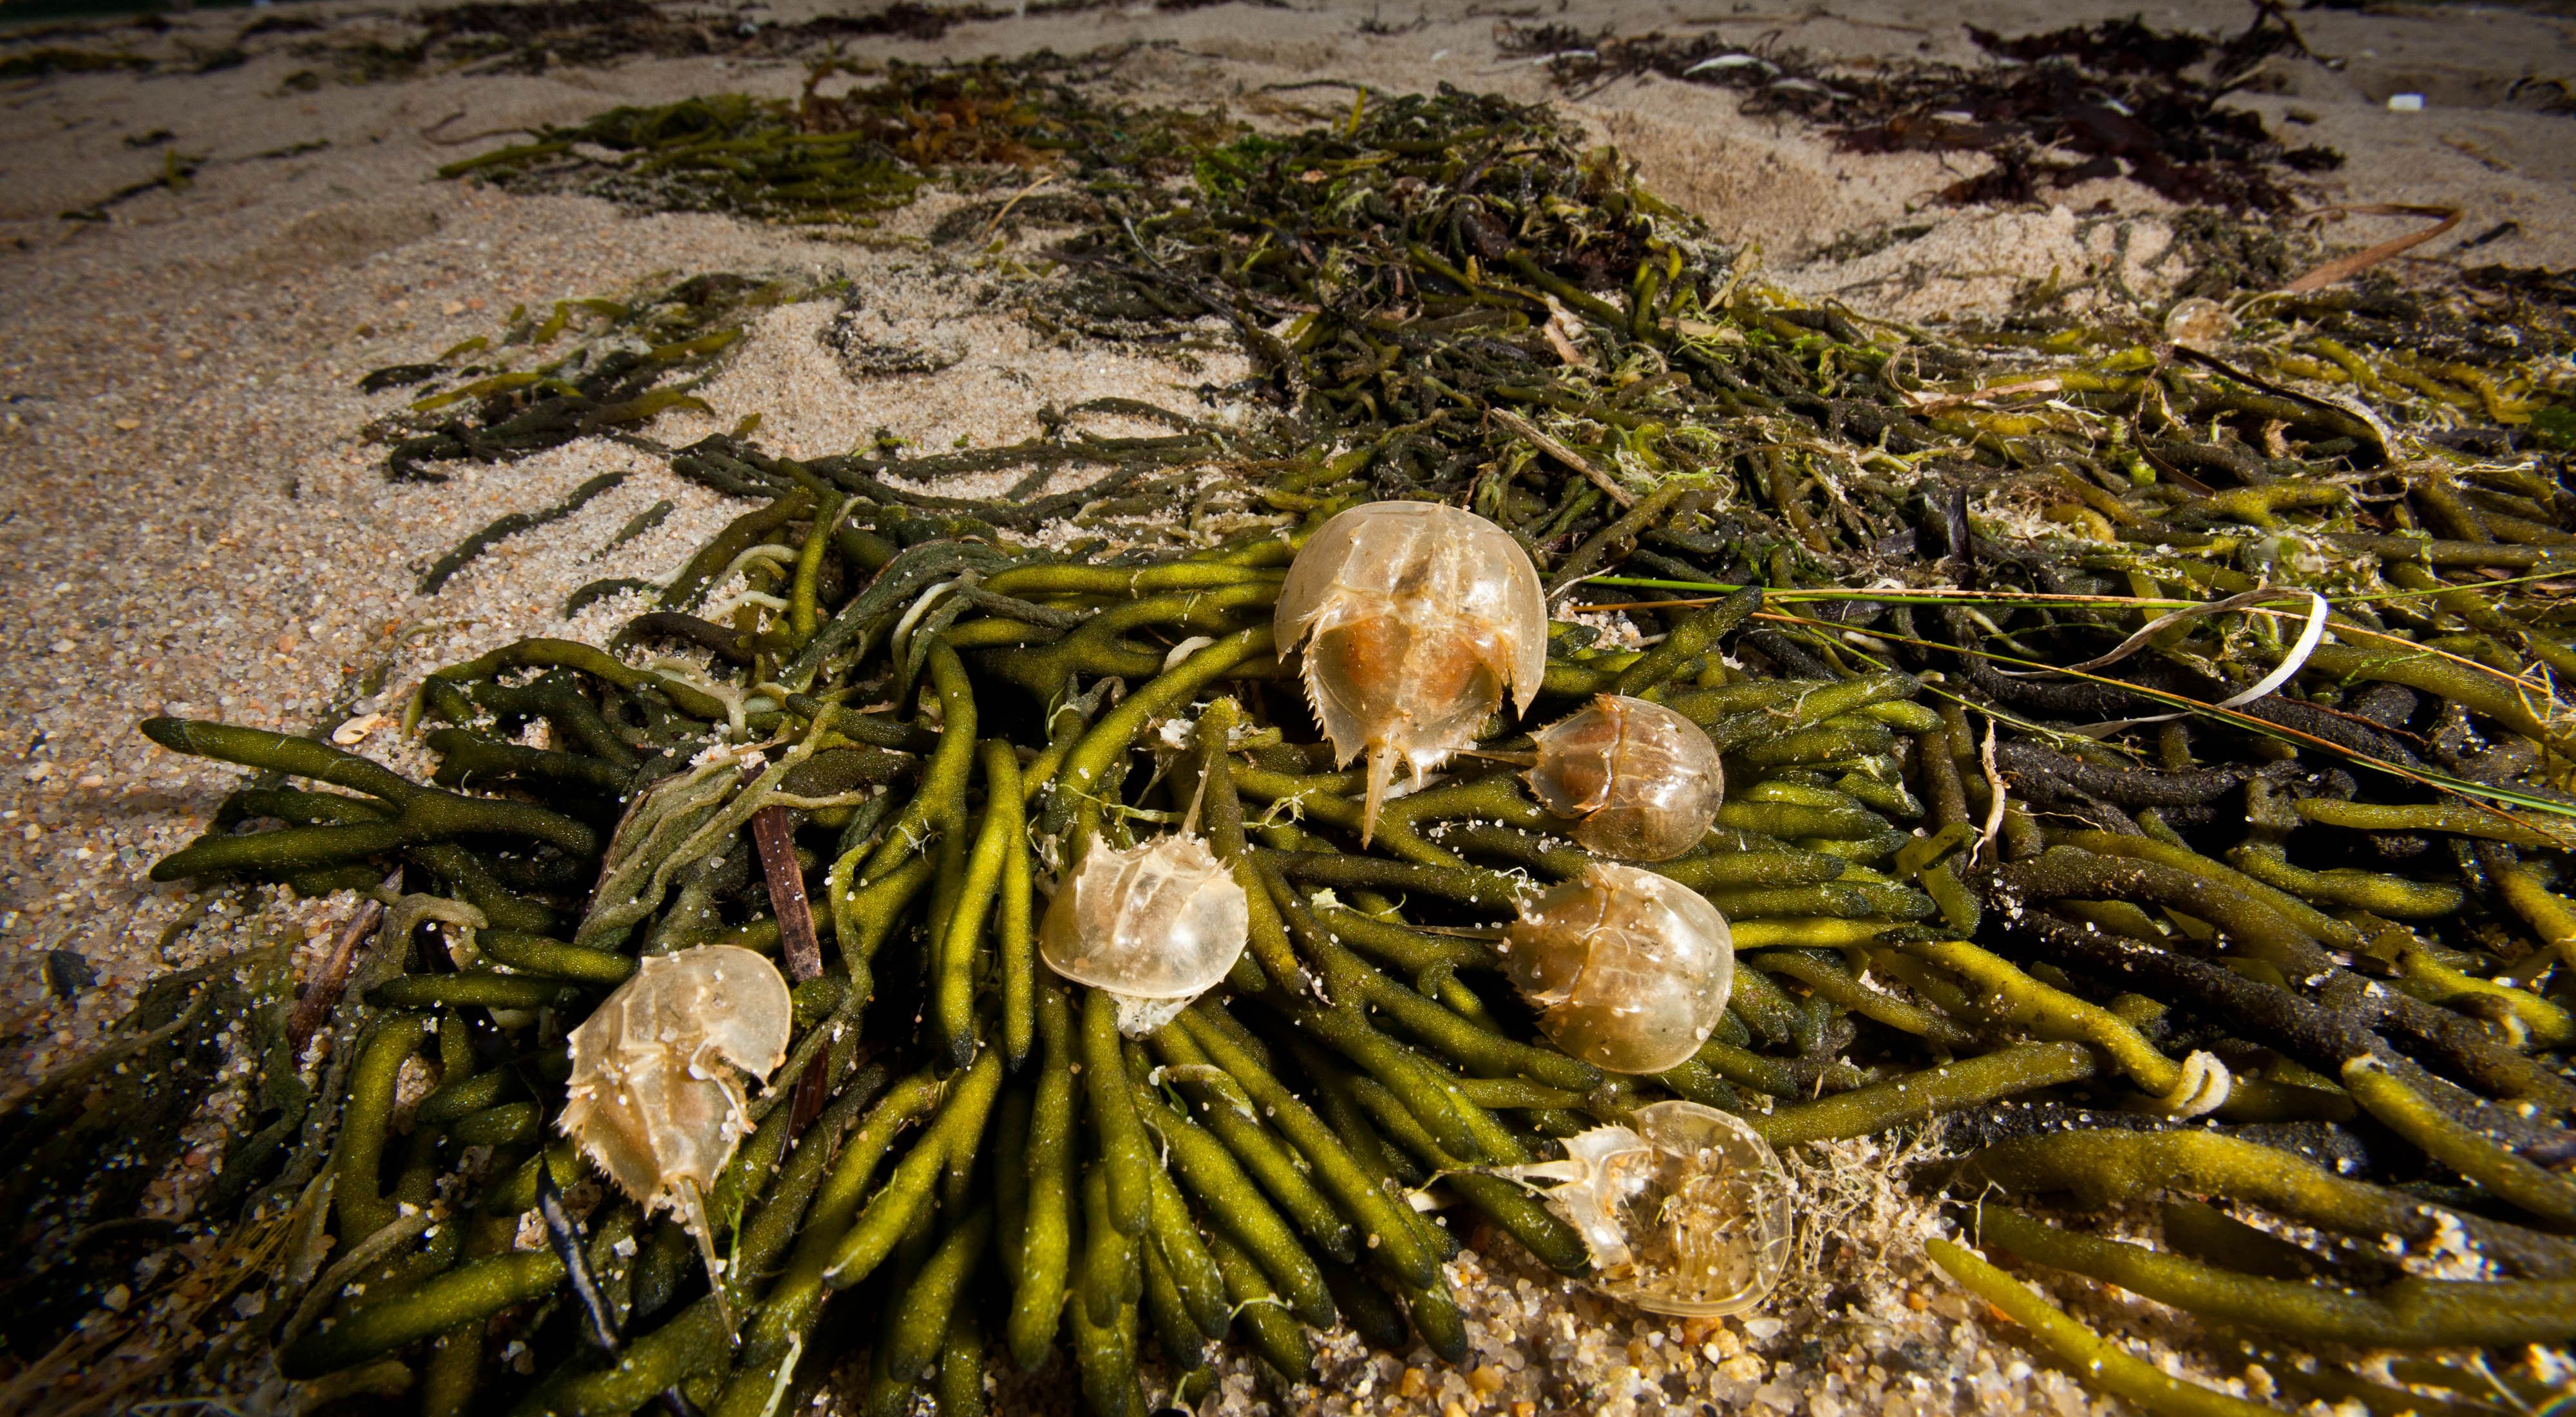 Six horseshoe crabs sit on top of a pile of green seaweed that has washed up onto a sandy Delaware Bay beach.